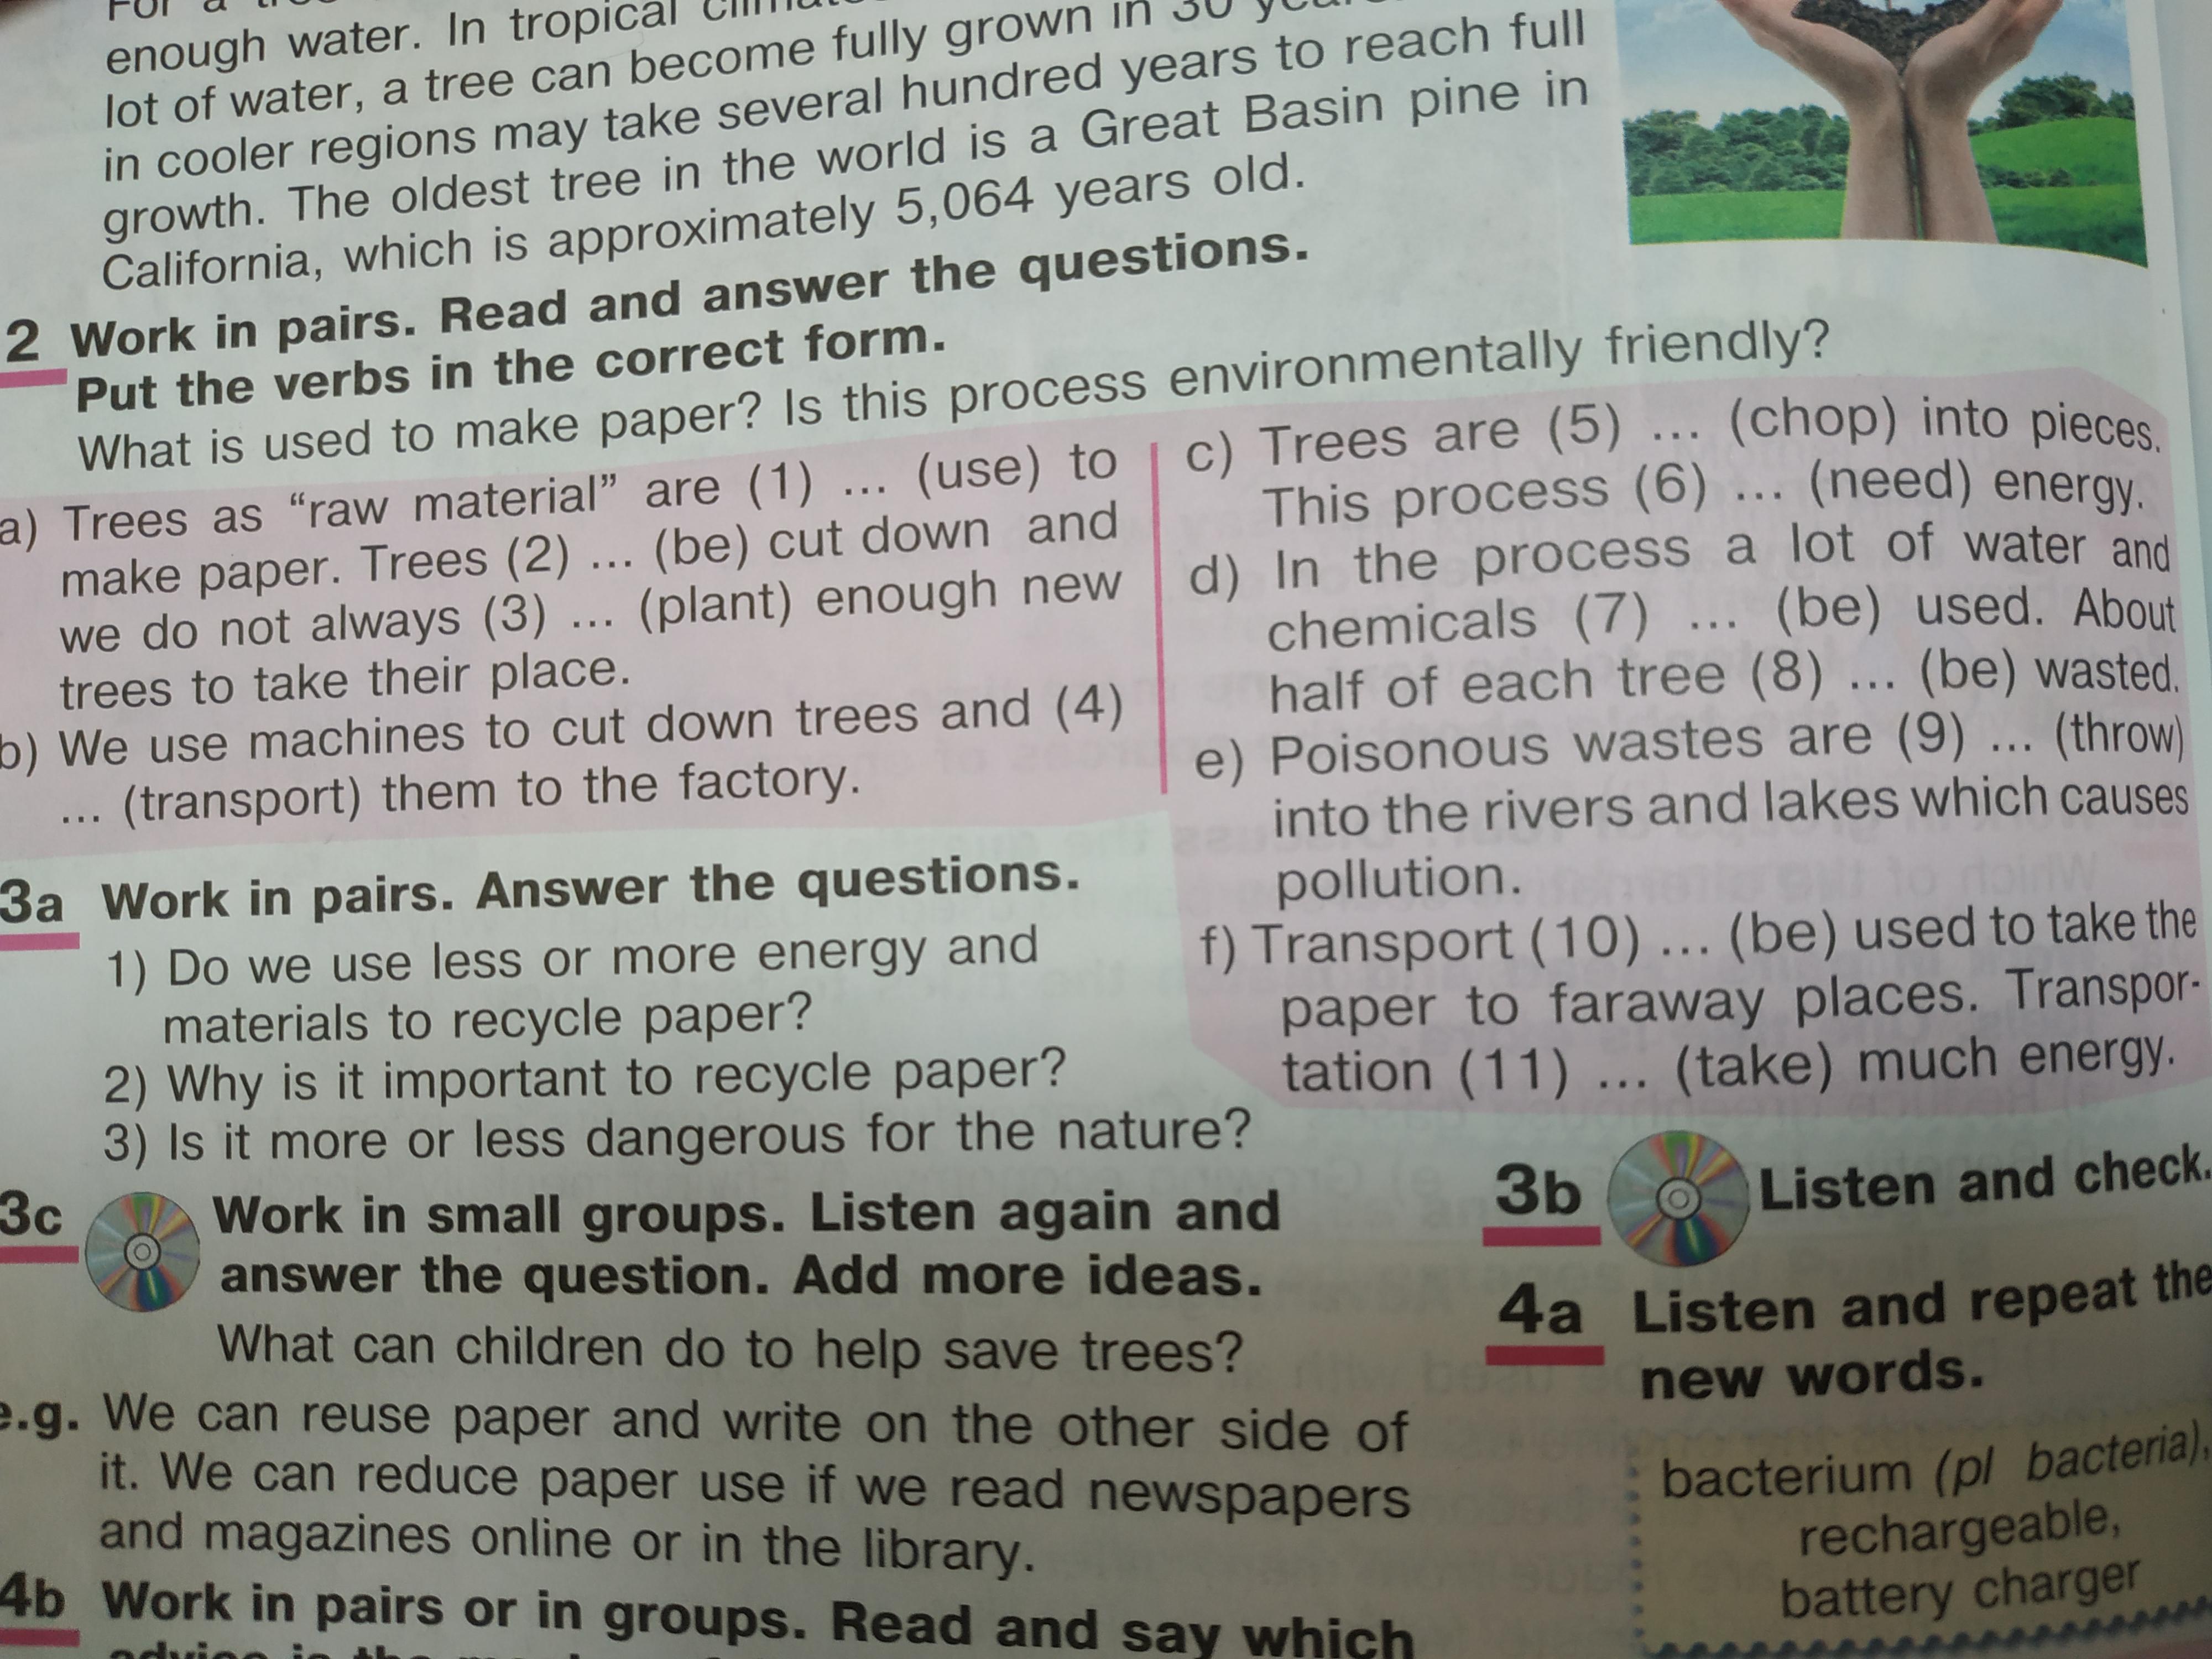 3 answer the questions in pairs